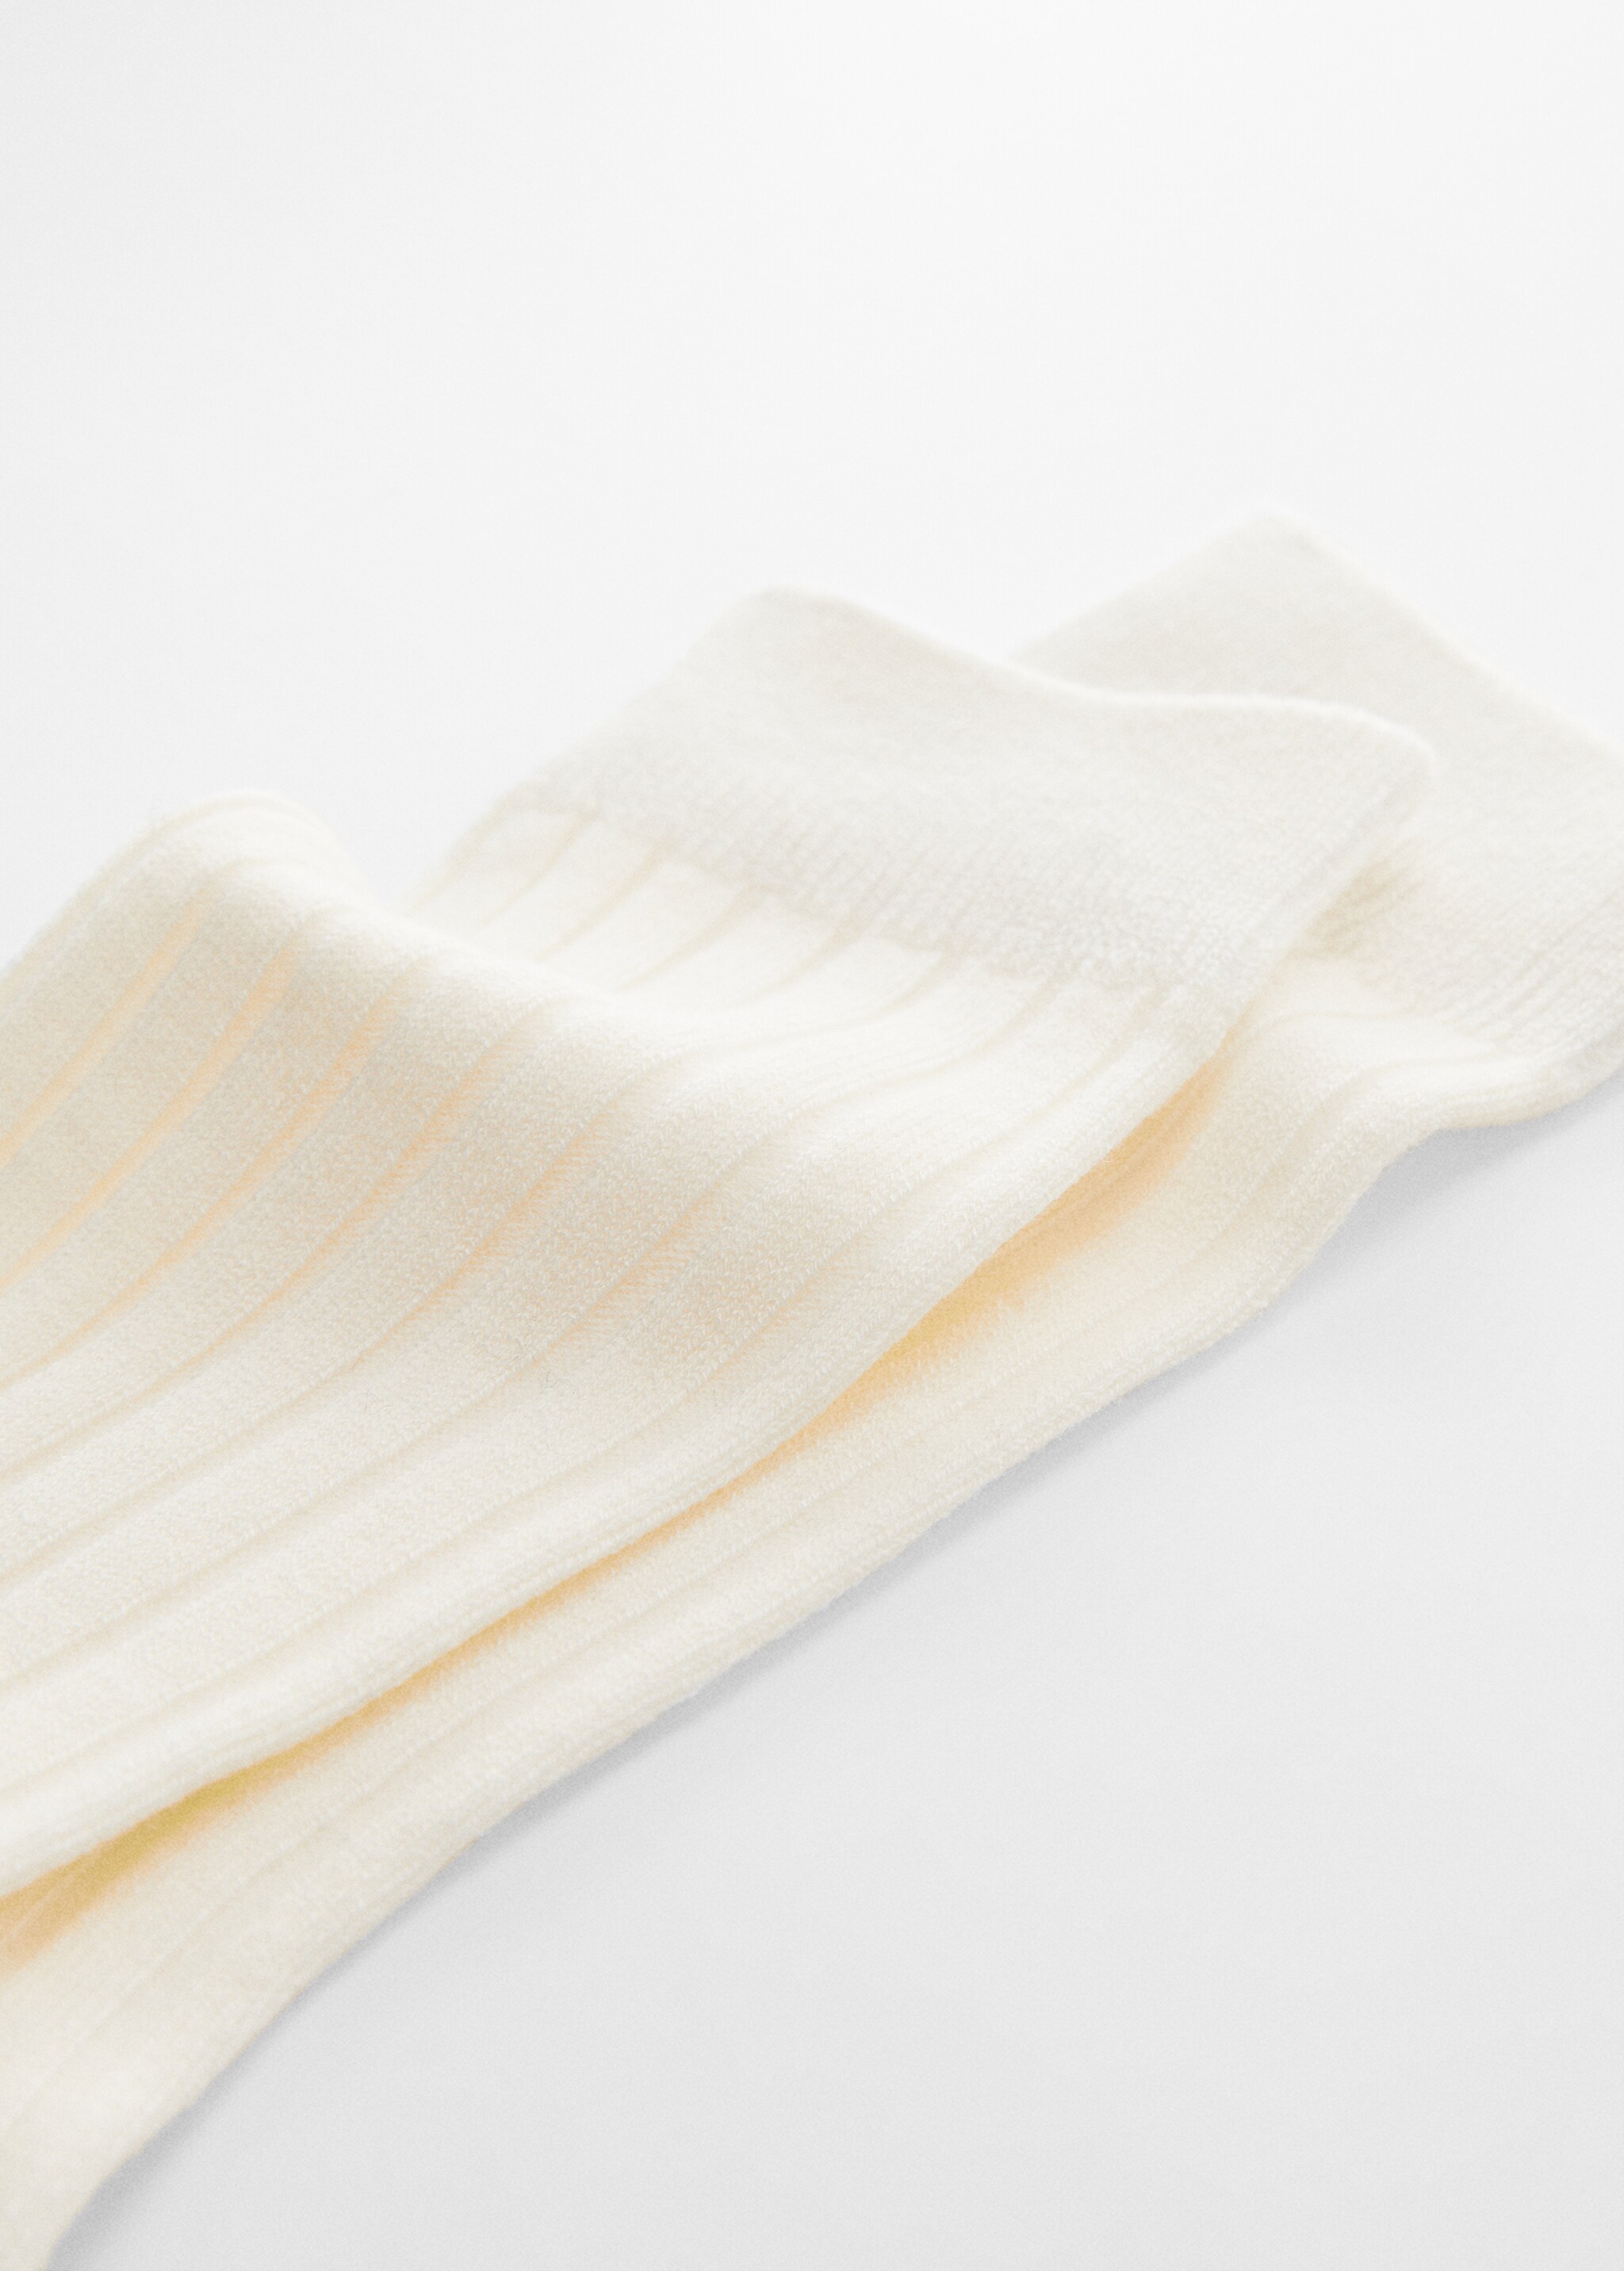 Ribbed socks - Details of the article 1